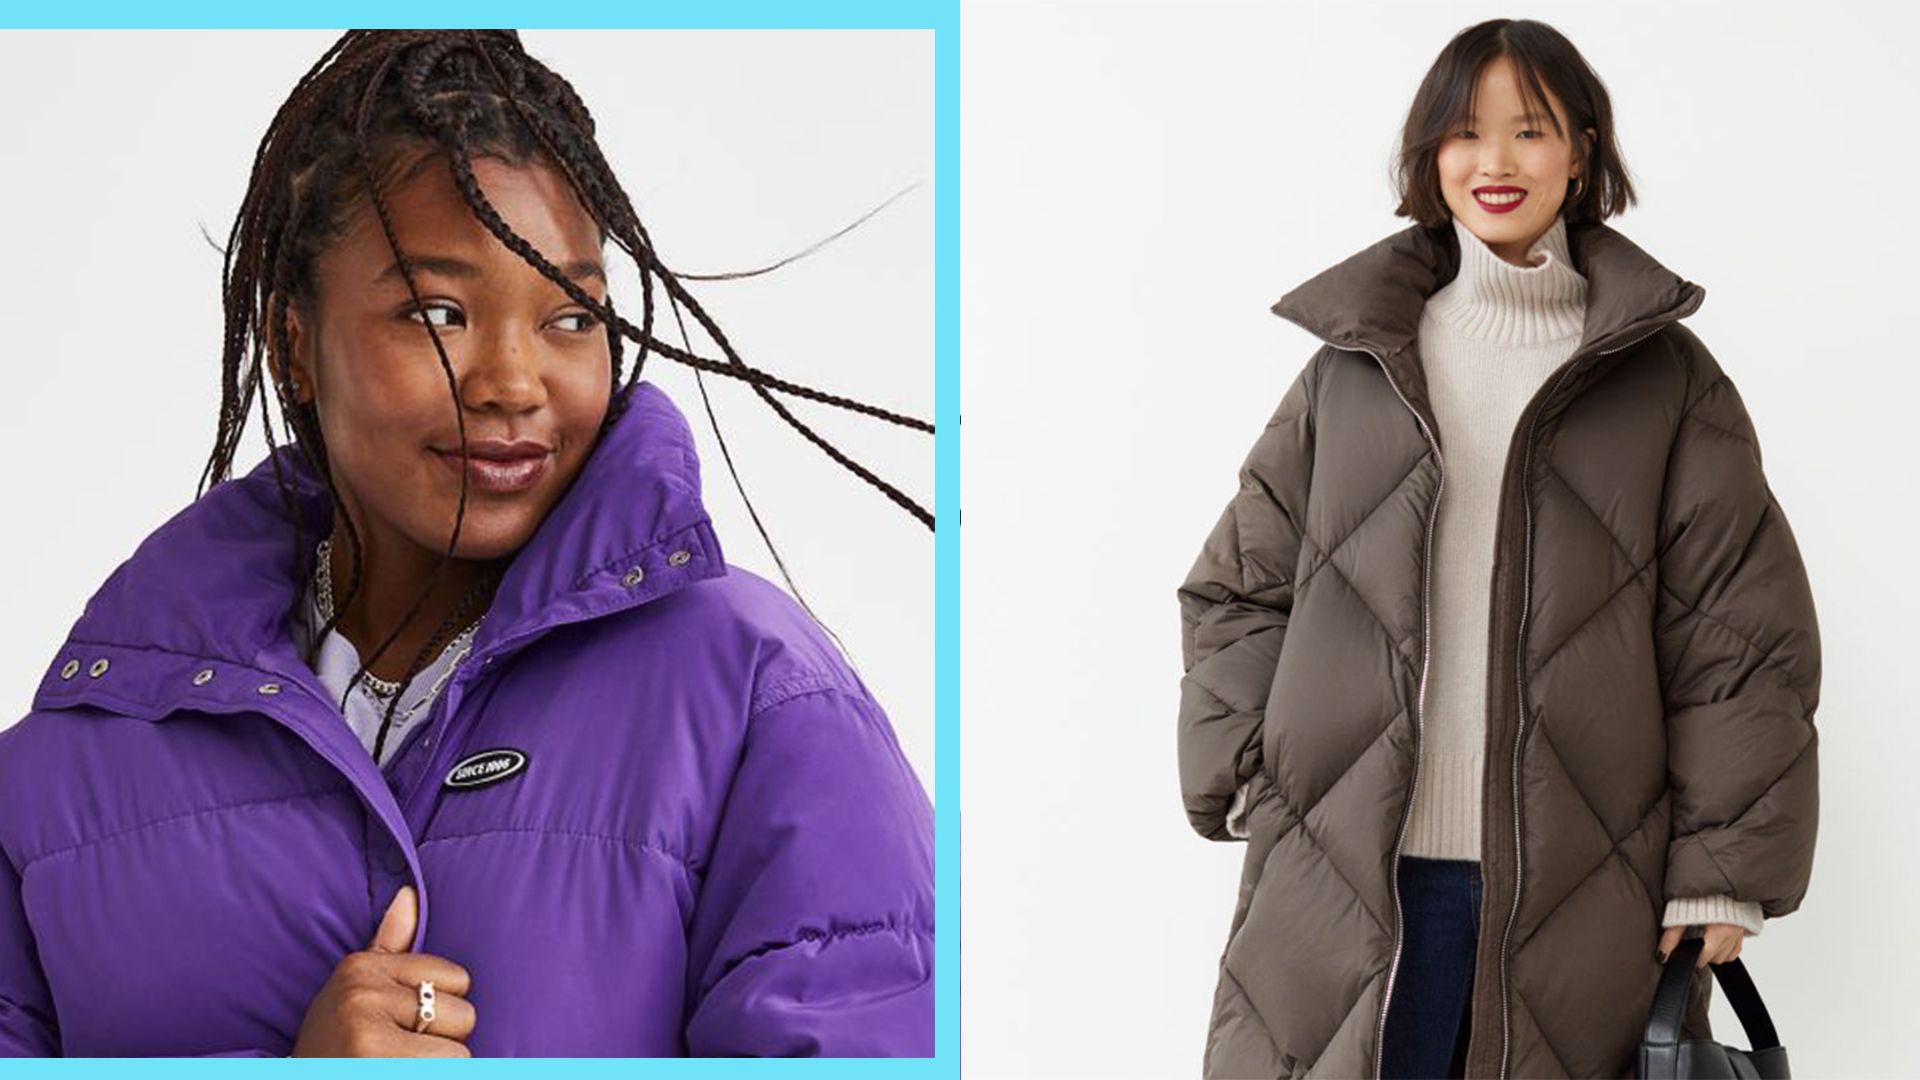 The 23 Best Puffer Jackets for Winter